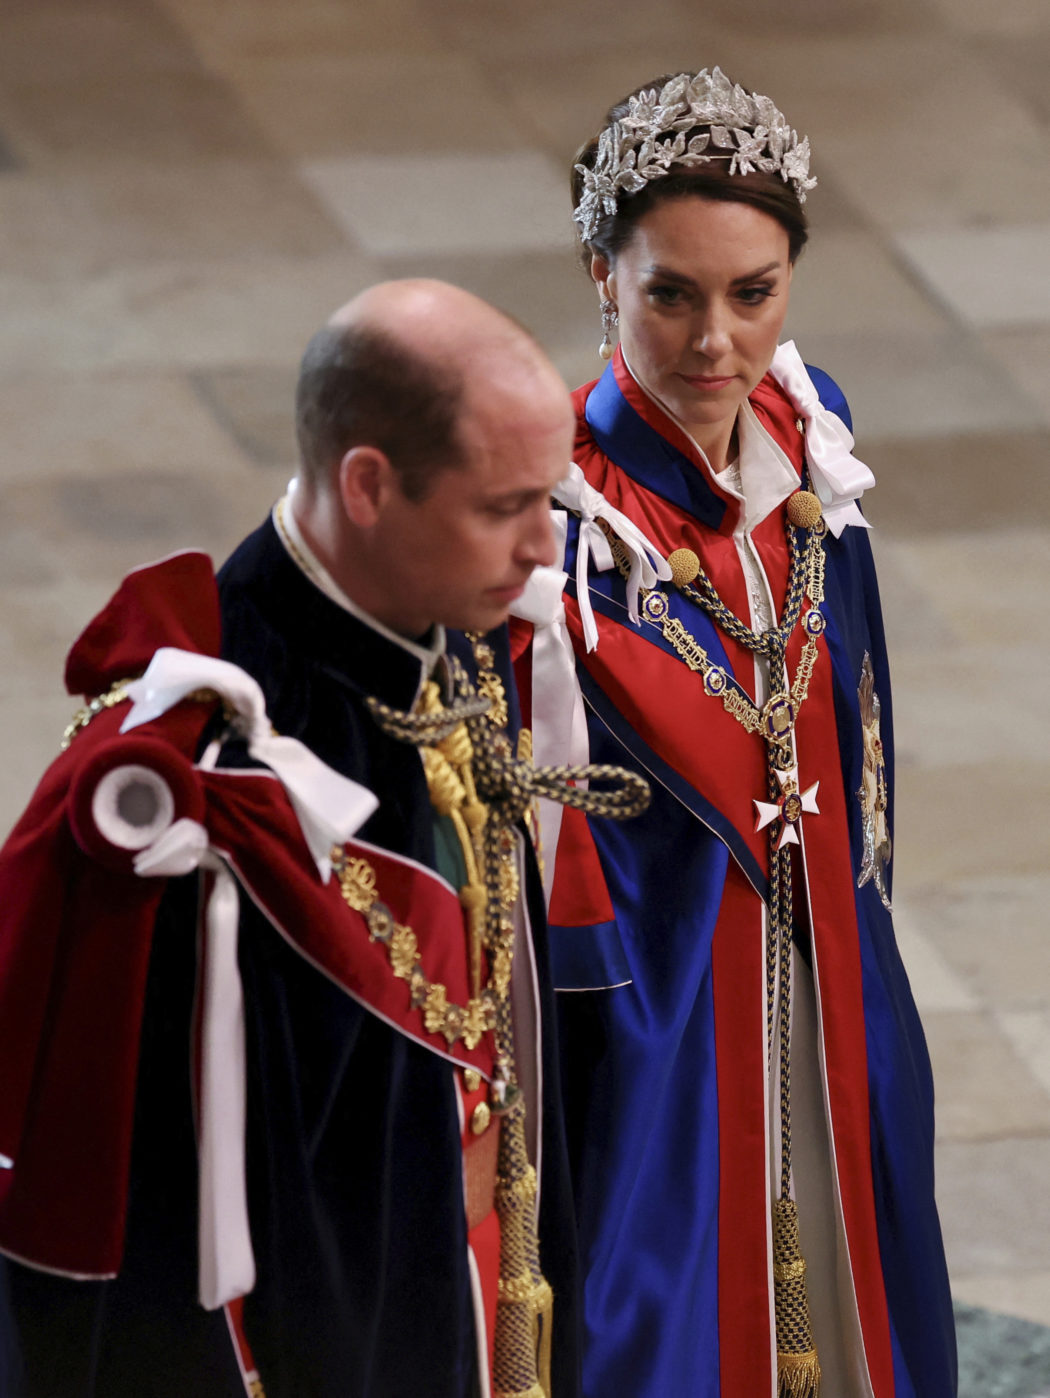 Britain’s Prince William and Kate, Princess of Wales, arrive at the coronation of King Charles III at Westminster Abbey, London, Saturday, May 6, 2023. (Phil Noble/Pool Photo via AP)